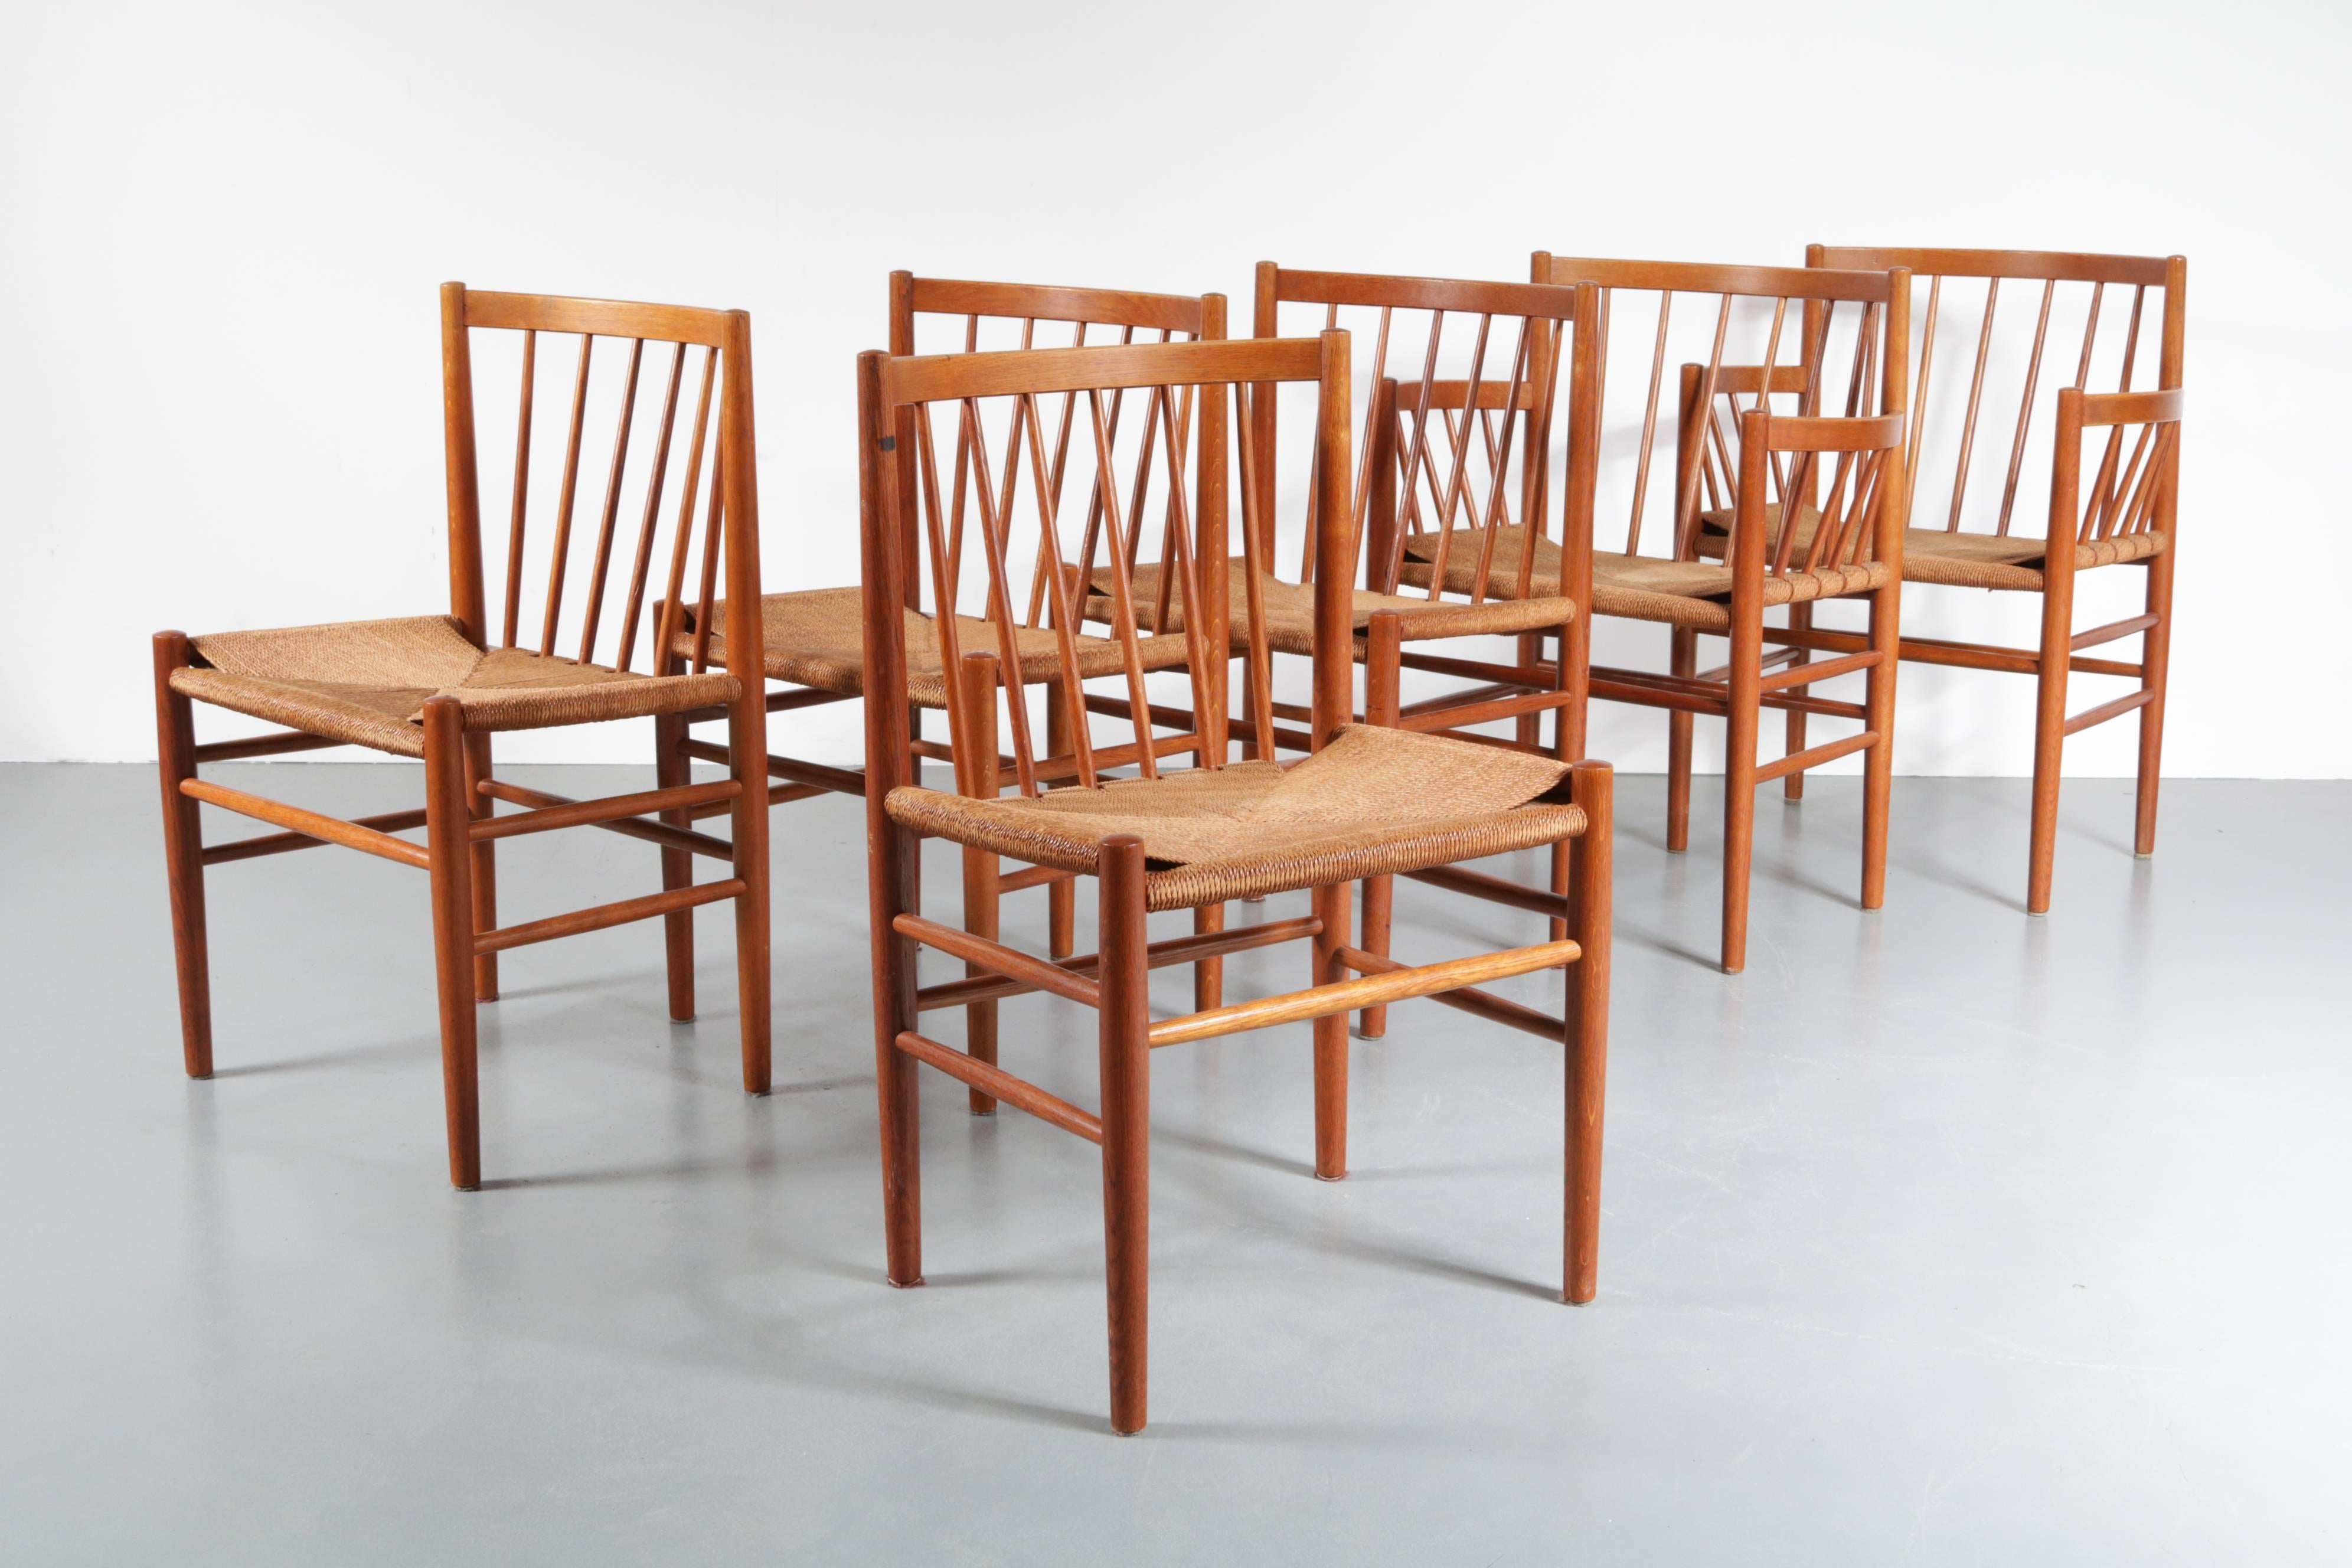 A beautiful set of six dining chairs designed by Jorgen Baekmark for FDM Mobler in Denmark, circa 1950.

These wonderful pieces of Danish design are made of high quality teak wood with rush/papercord upholstery. They are beautifuly designed with